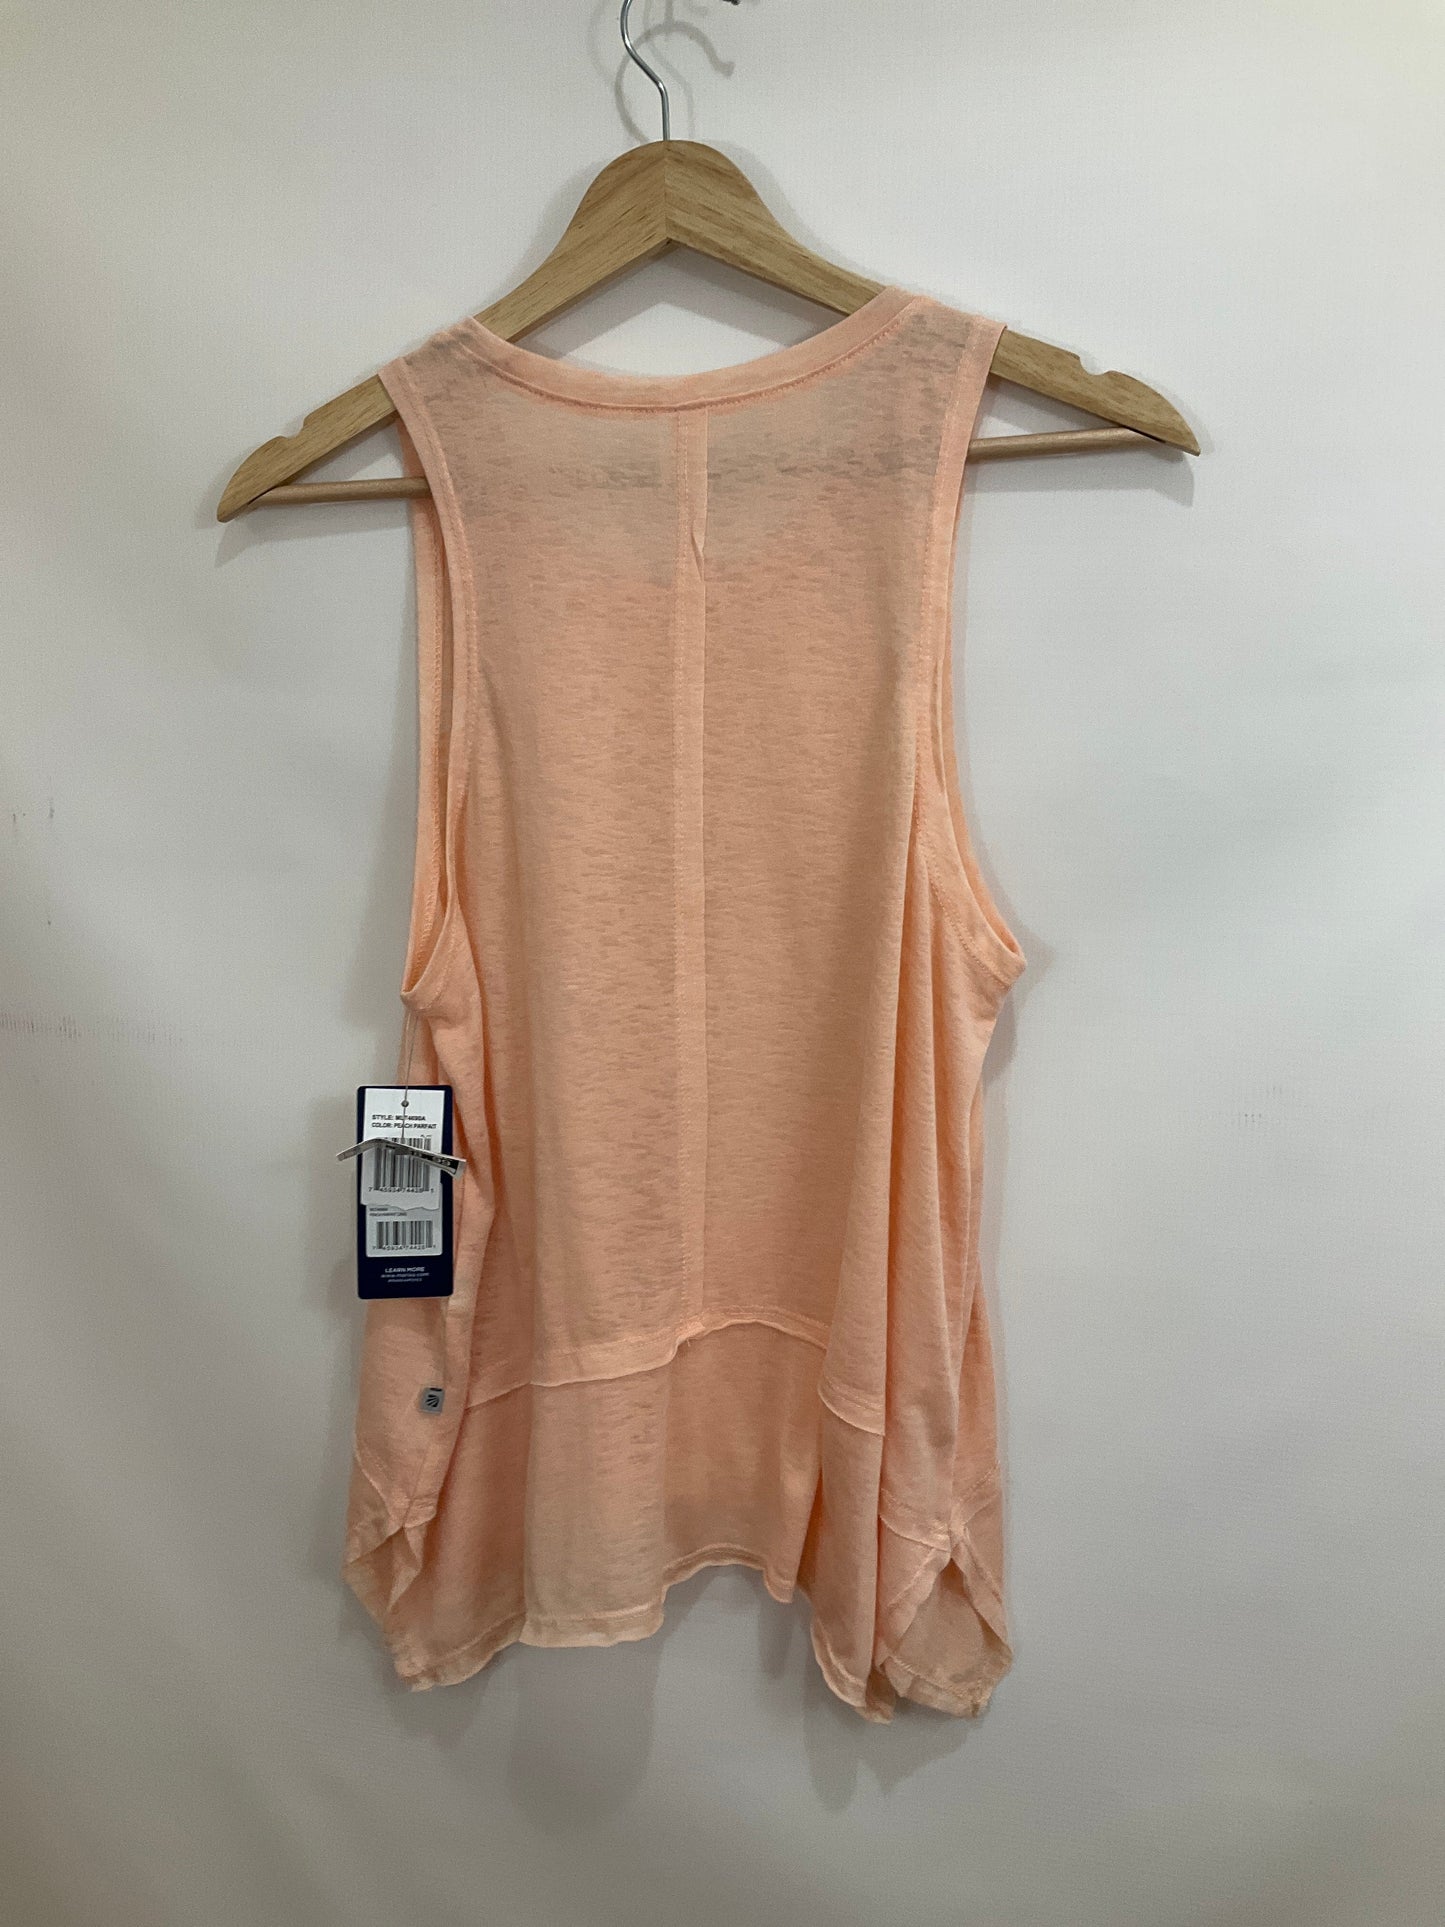 Athletic Tank Top By Marika  Size: S